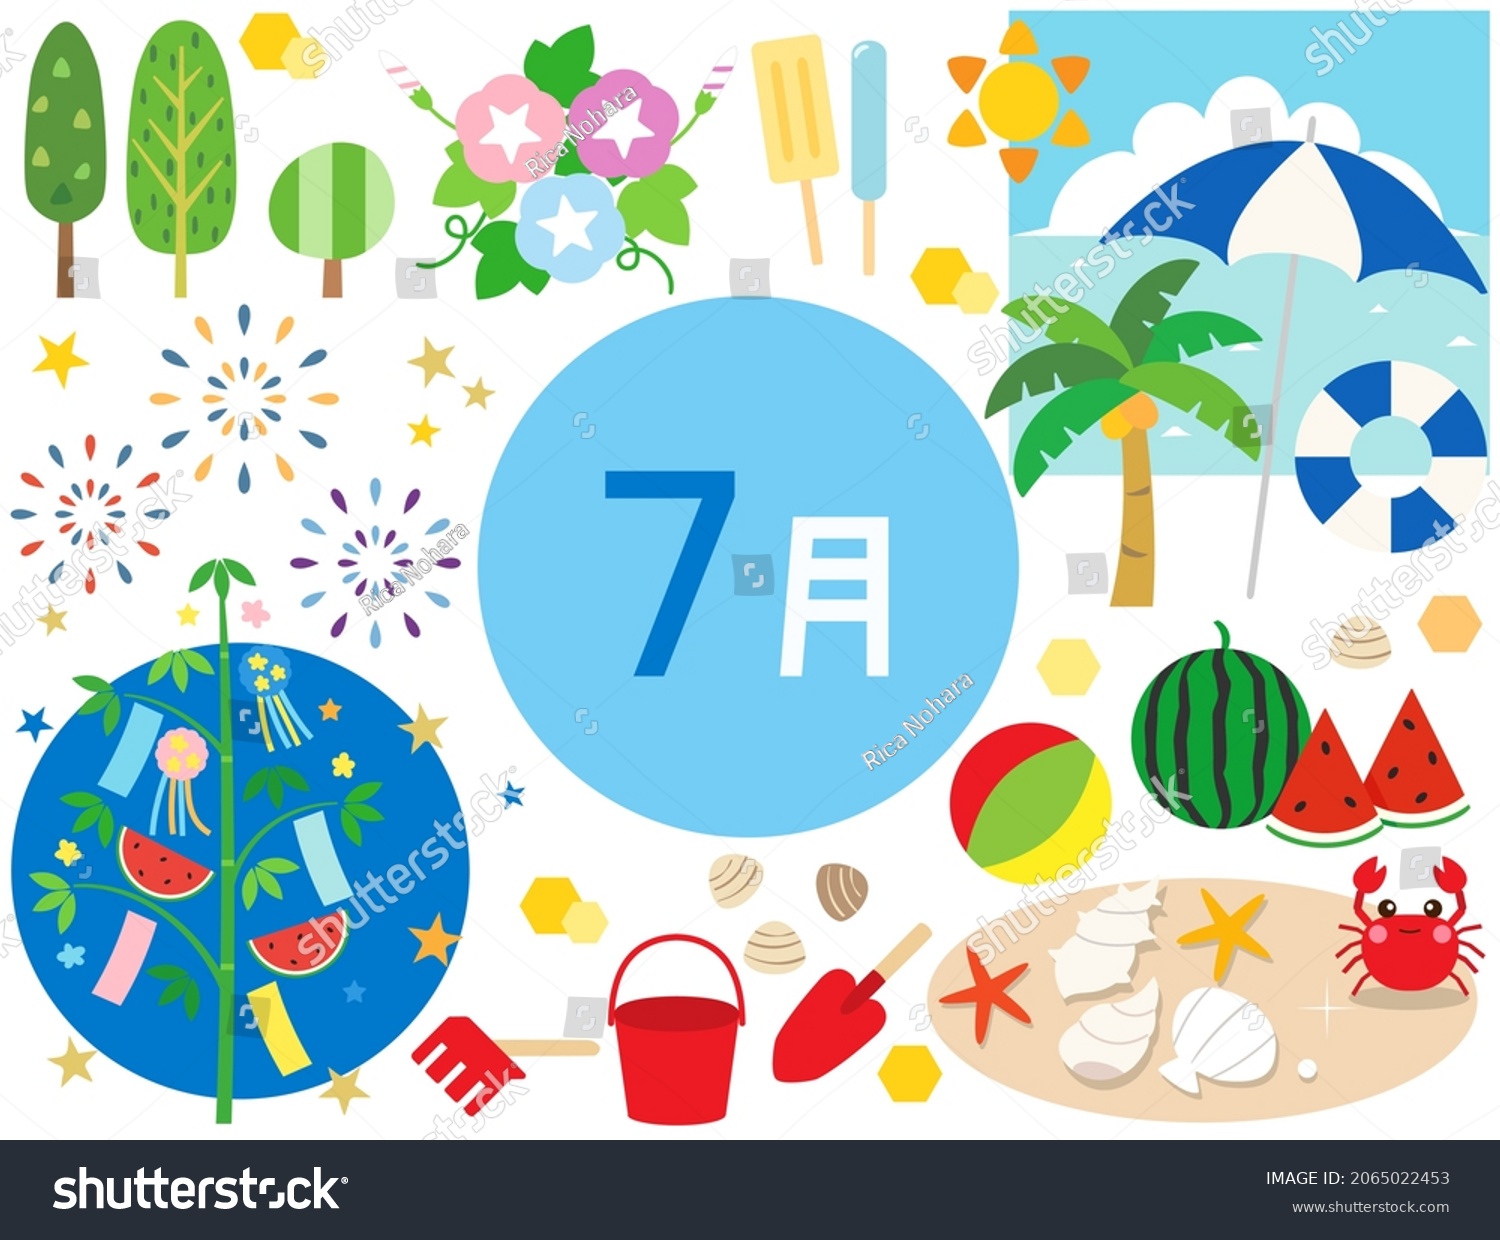 SVG of A set of illustrations for the July event in Japan. The letter in the middle means July. svg